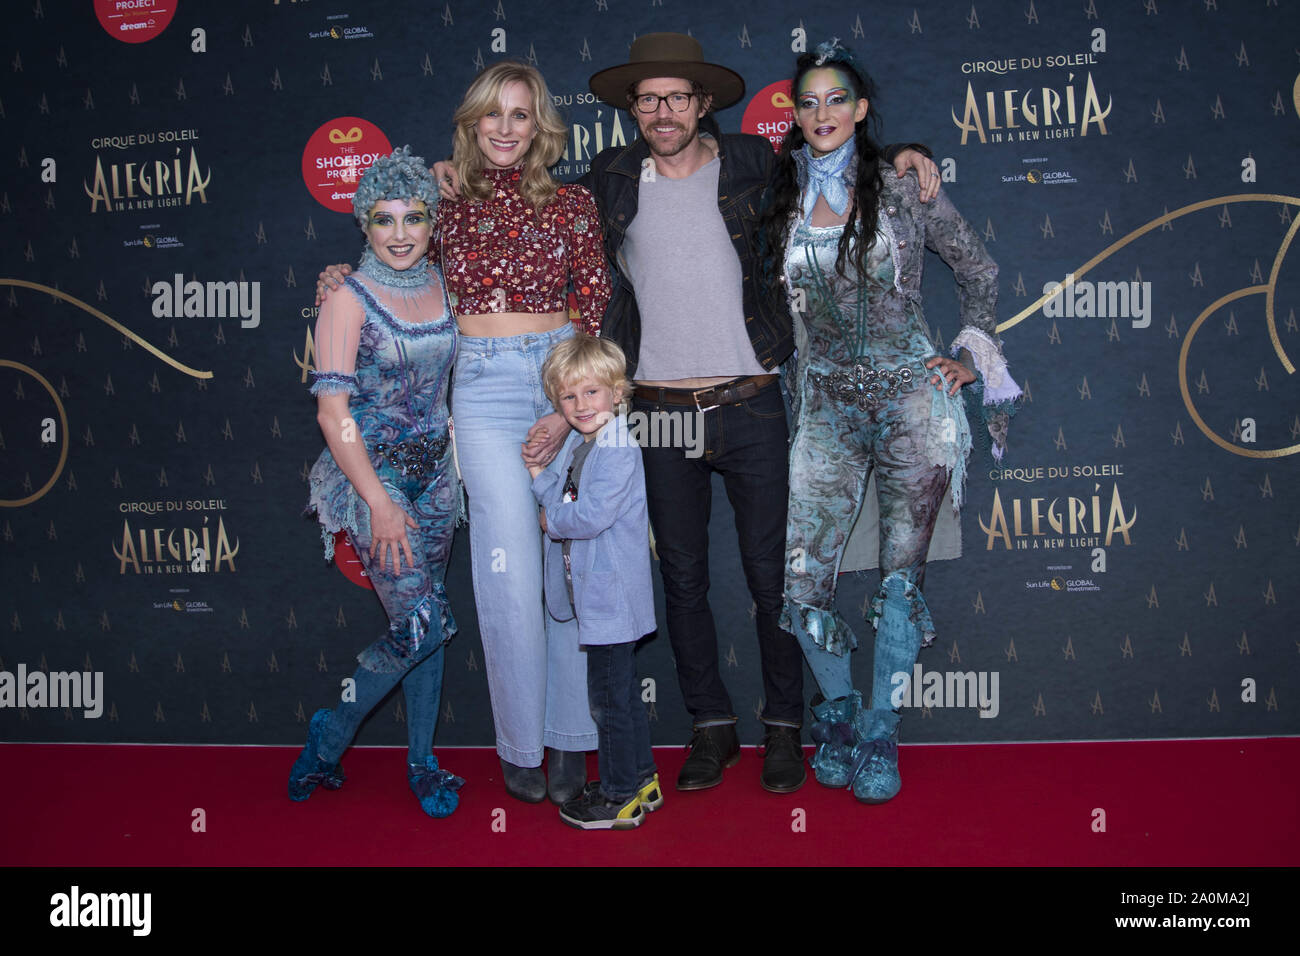 September 19, 2019, Toronto, Ontario, Canada: Canadian folk rock singers  Melissa McClelland and Luke Doucet and their child Chloe Doucet attending  the red carpet premiere of Cirque du Soleil most iconic production,